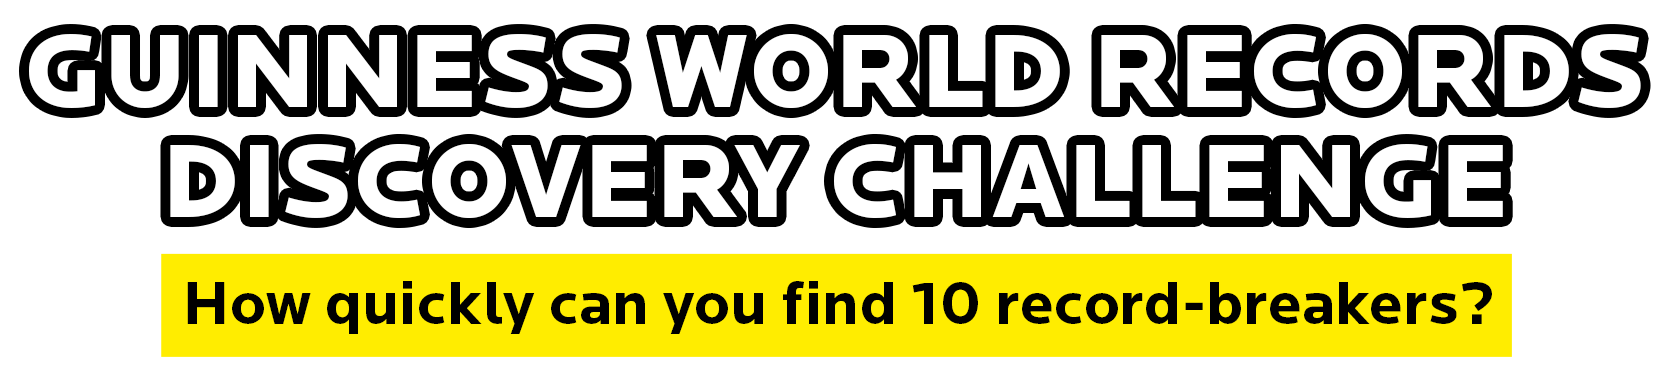 guinness-world-records-discovery-challenge